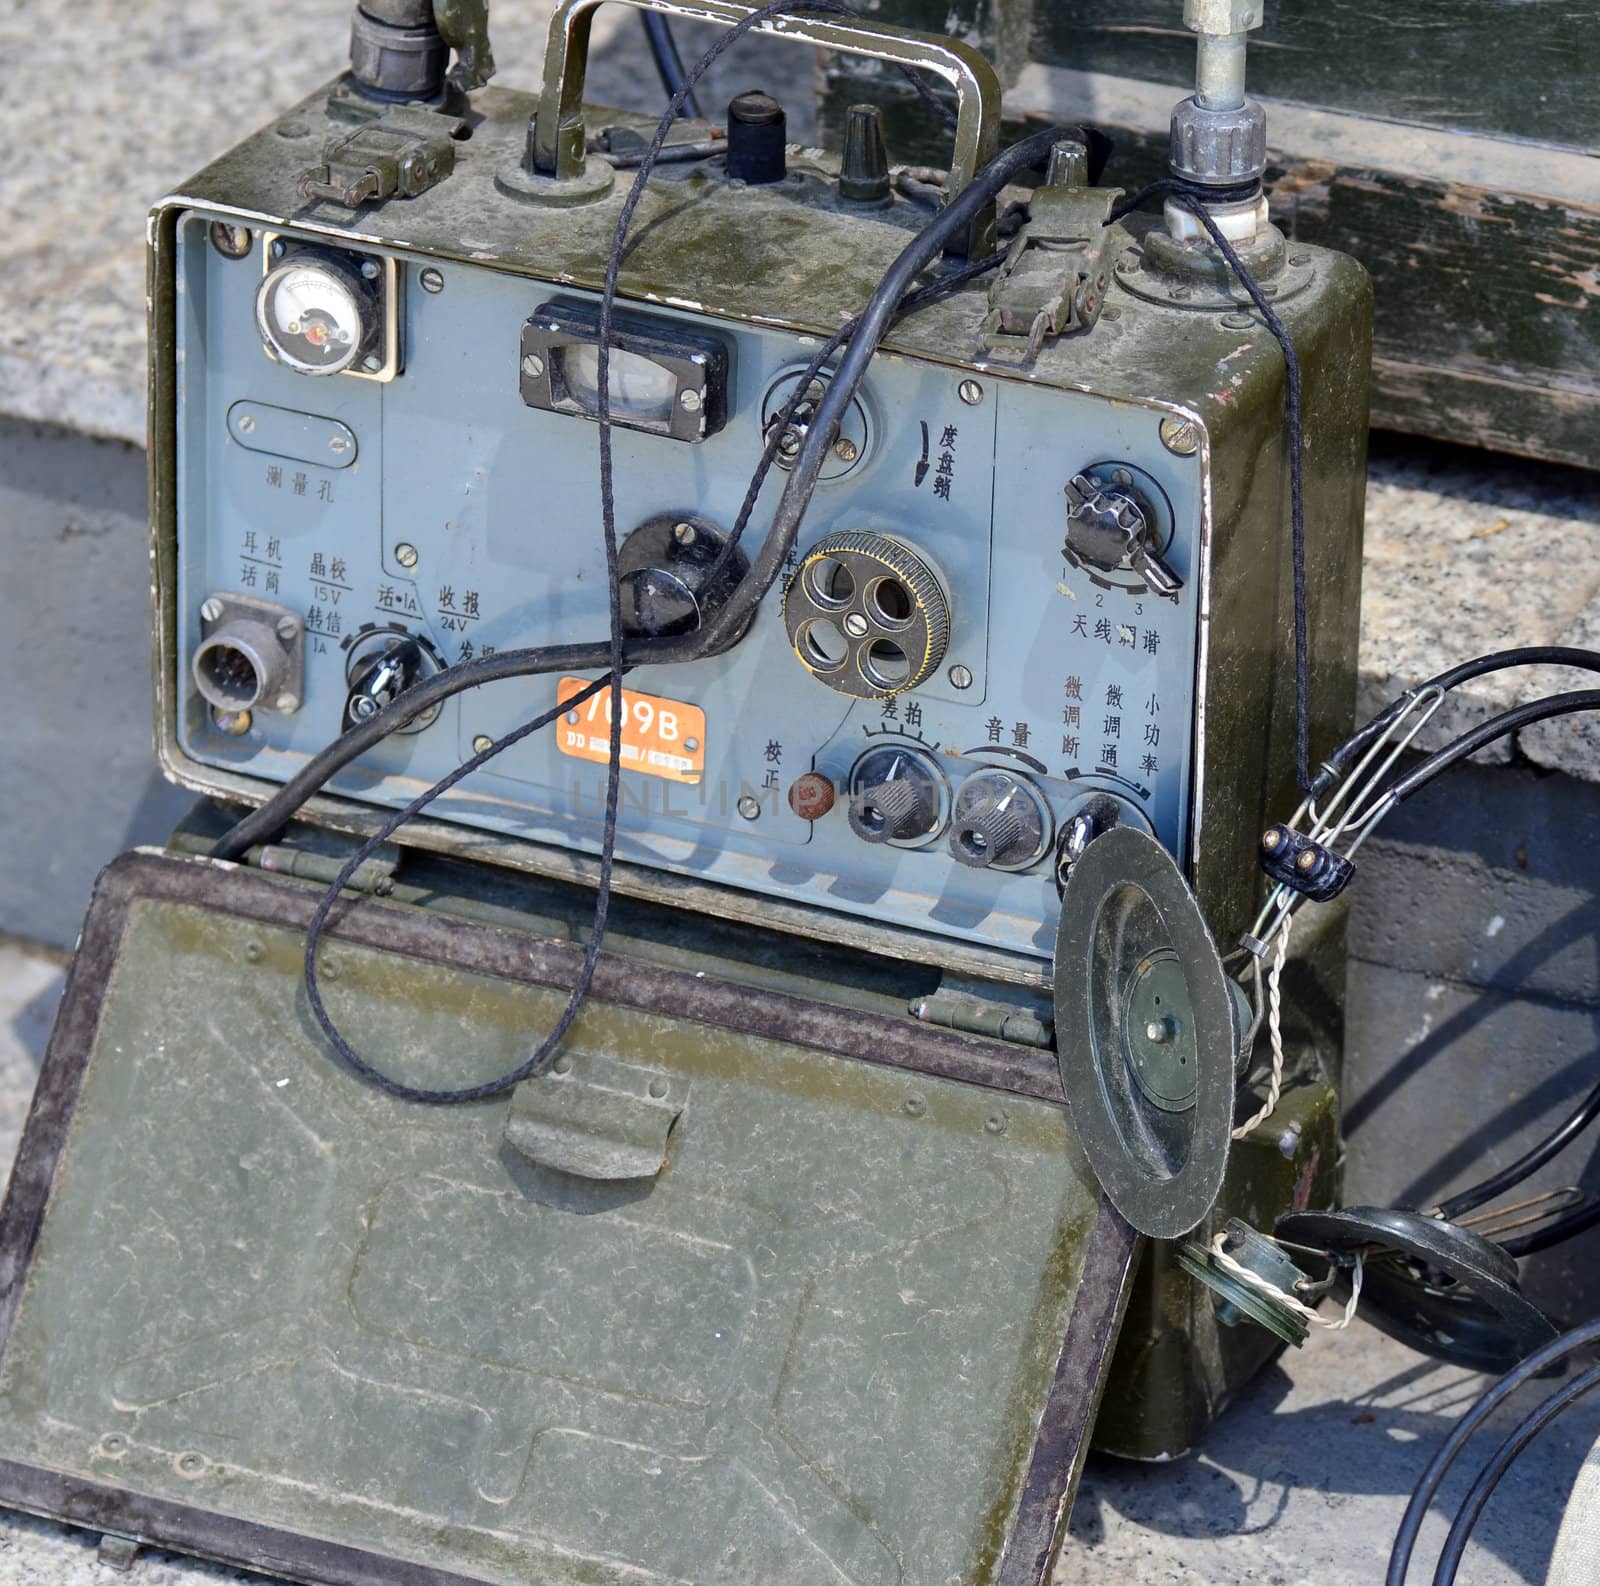 Chinese old military radio by Vectorex